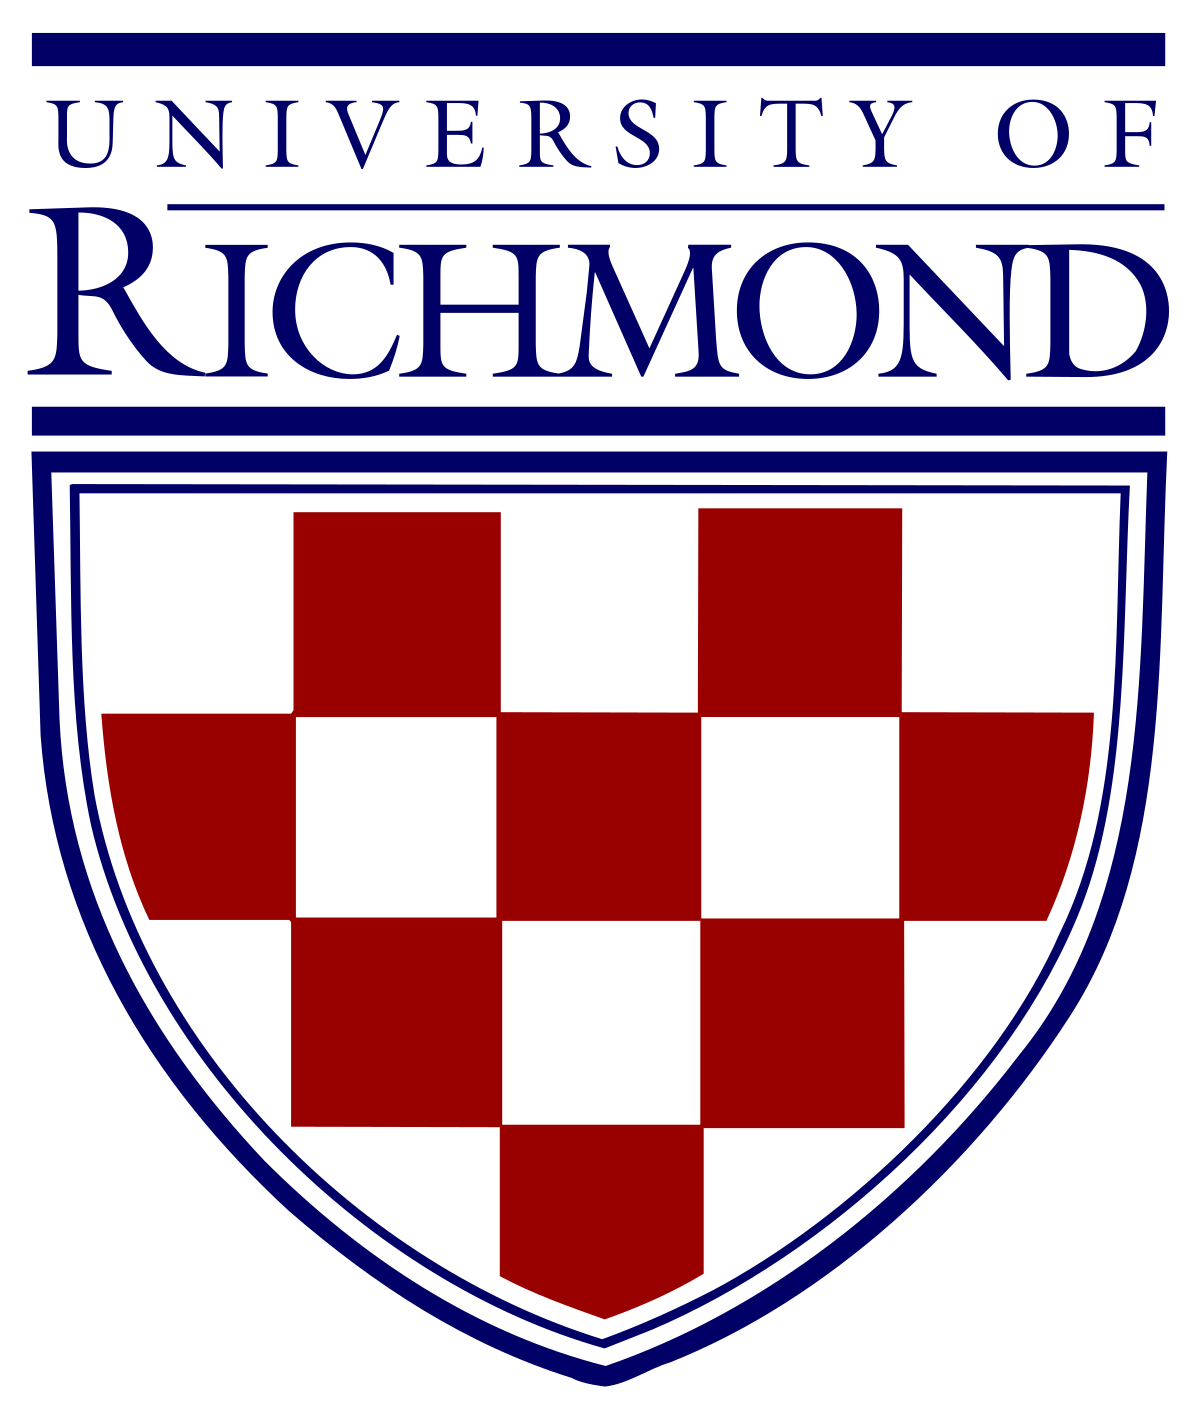 University of Richmond logo - shield with red and white checked boxes